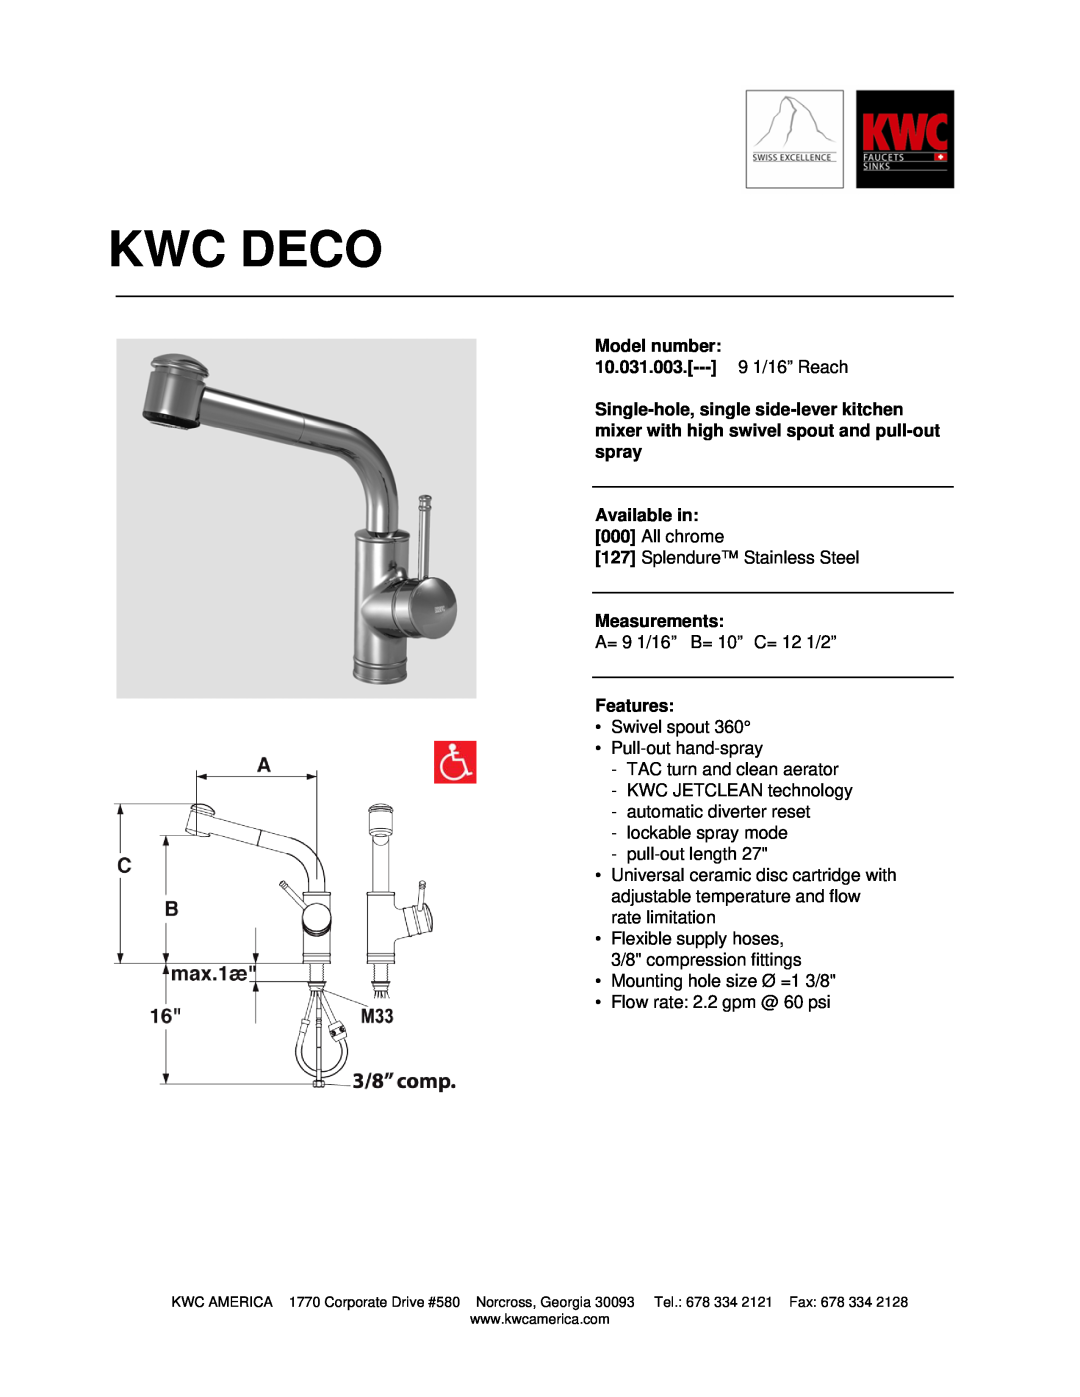 KWC manual Kwc Deco, Model number 10.031.003.--- 9 1/16” Reach, Available in, Measurements, Features 